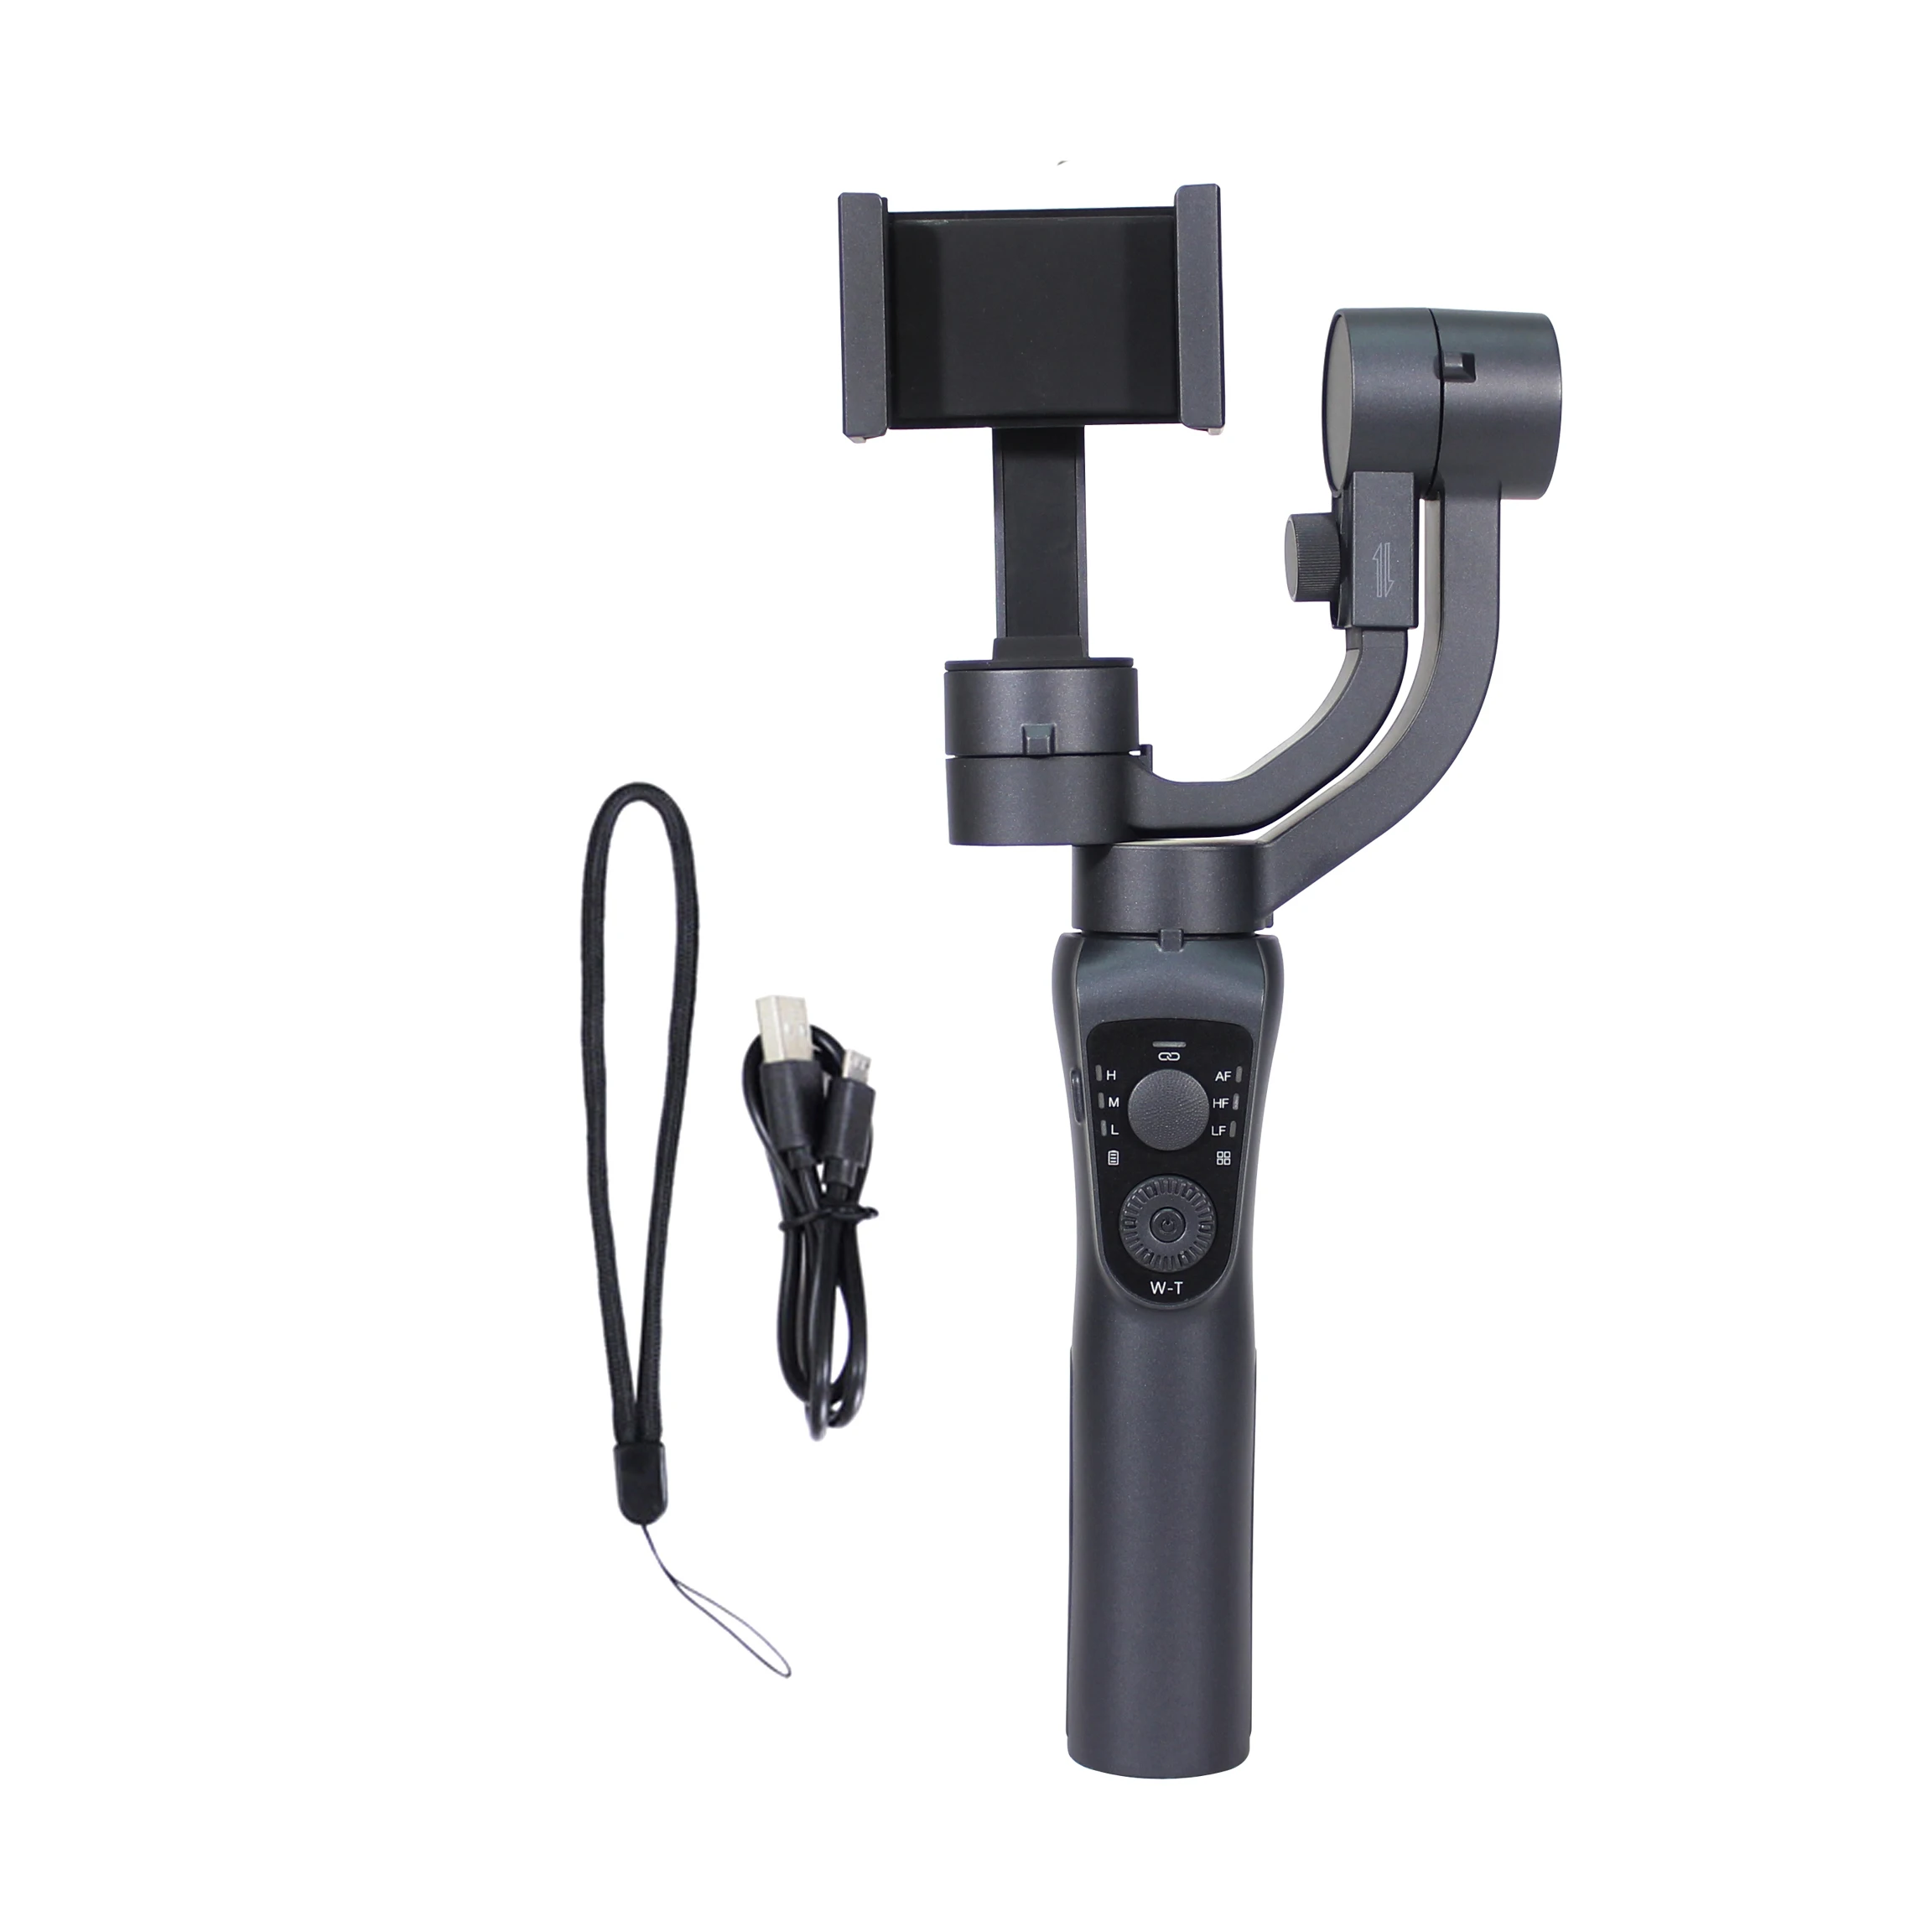 

New Design Selfie Stick with App Control 3-axis Hand-held Gimbal Stabilizer for Smartphone/Action Camera